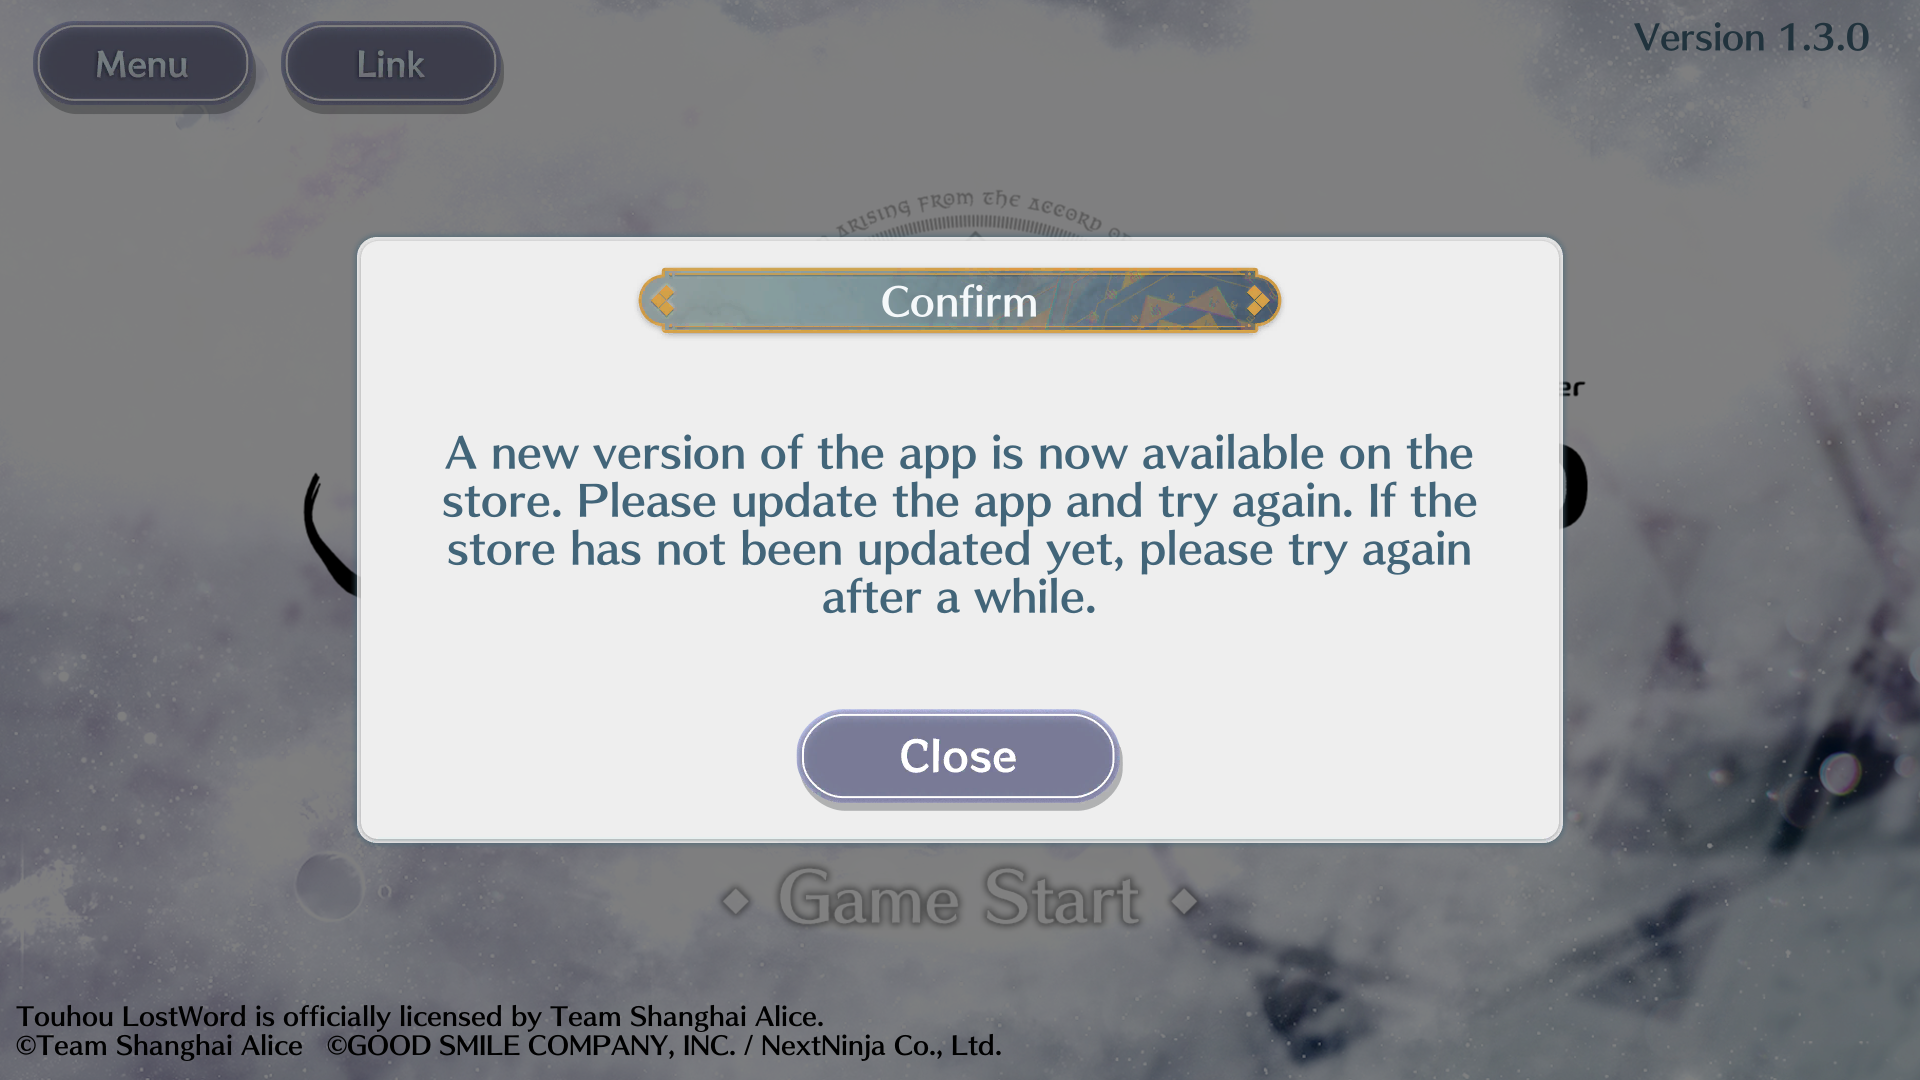 If an update is available, download and install it
If no update is available, uninstall the application